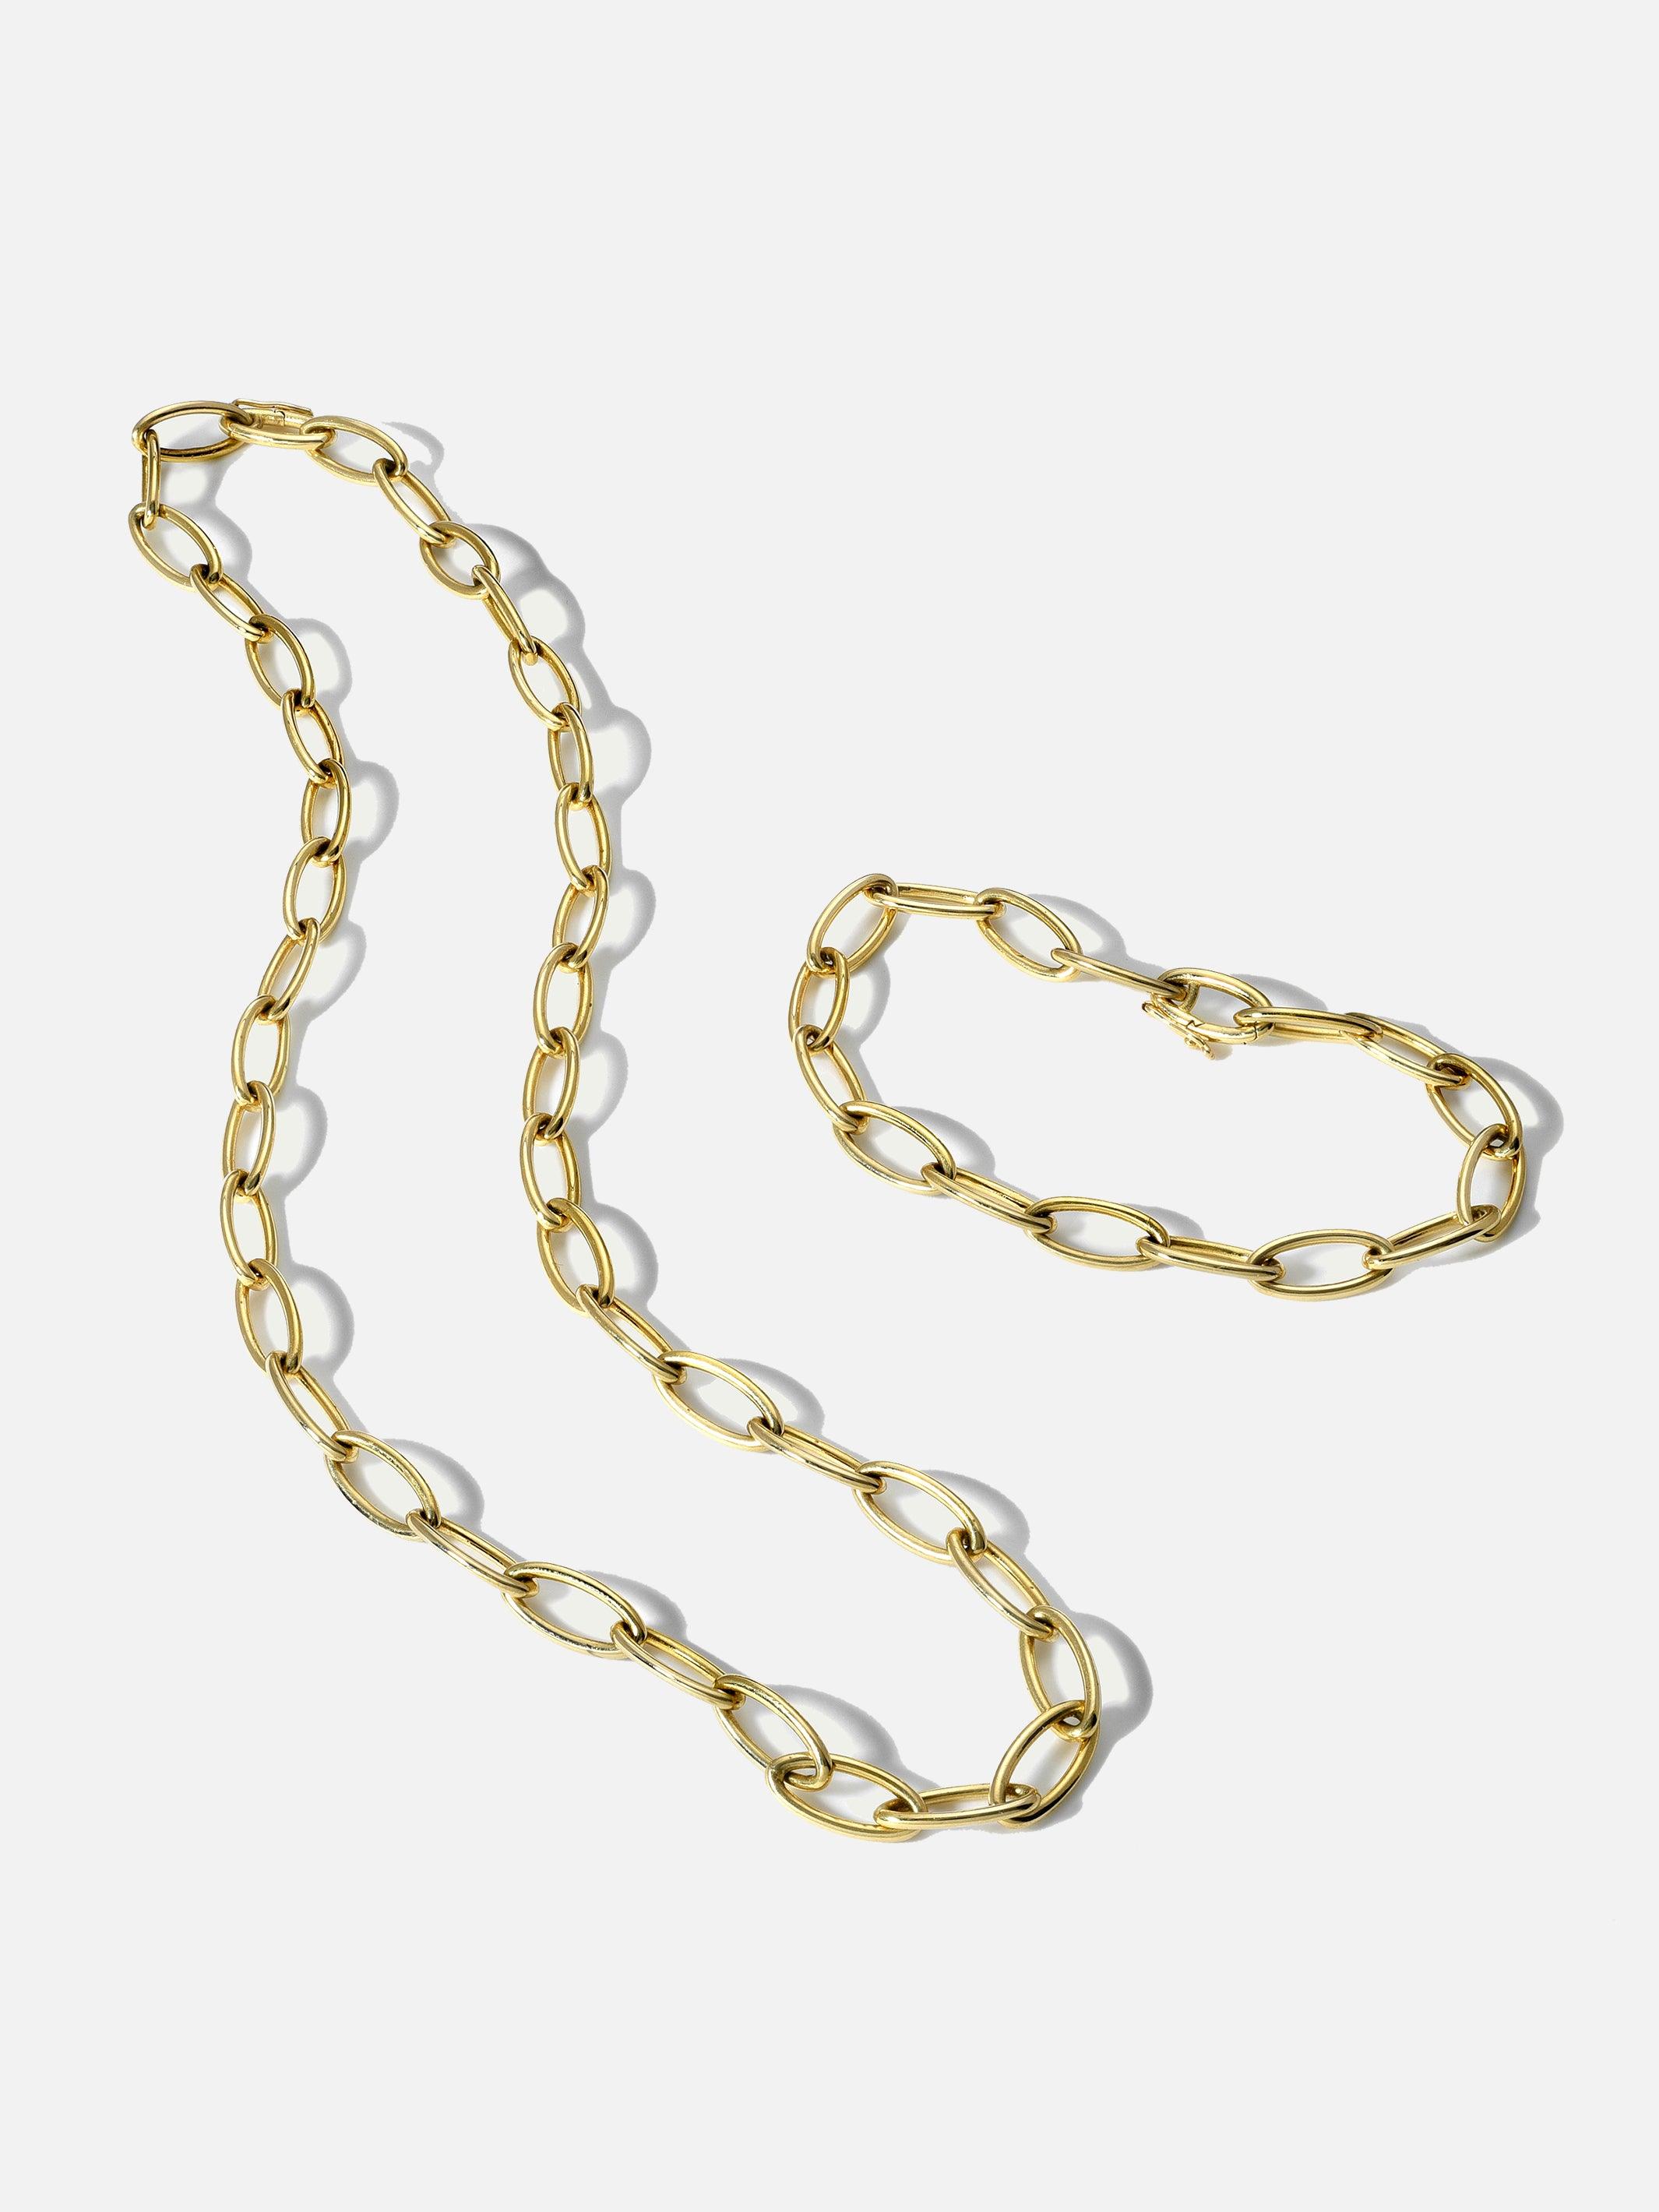 Stacy Nolan Oval Link Chain Necklace 2